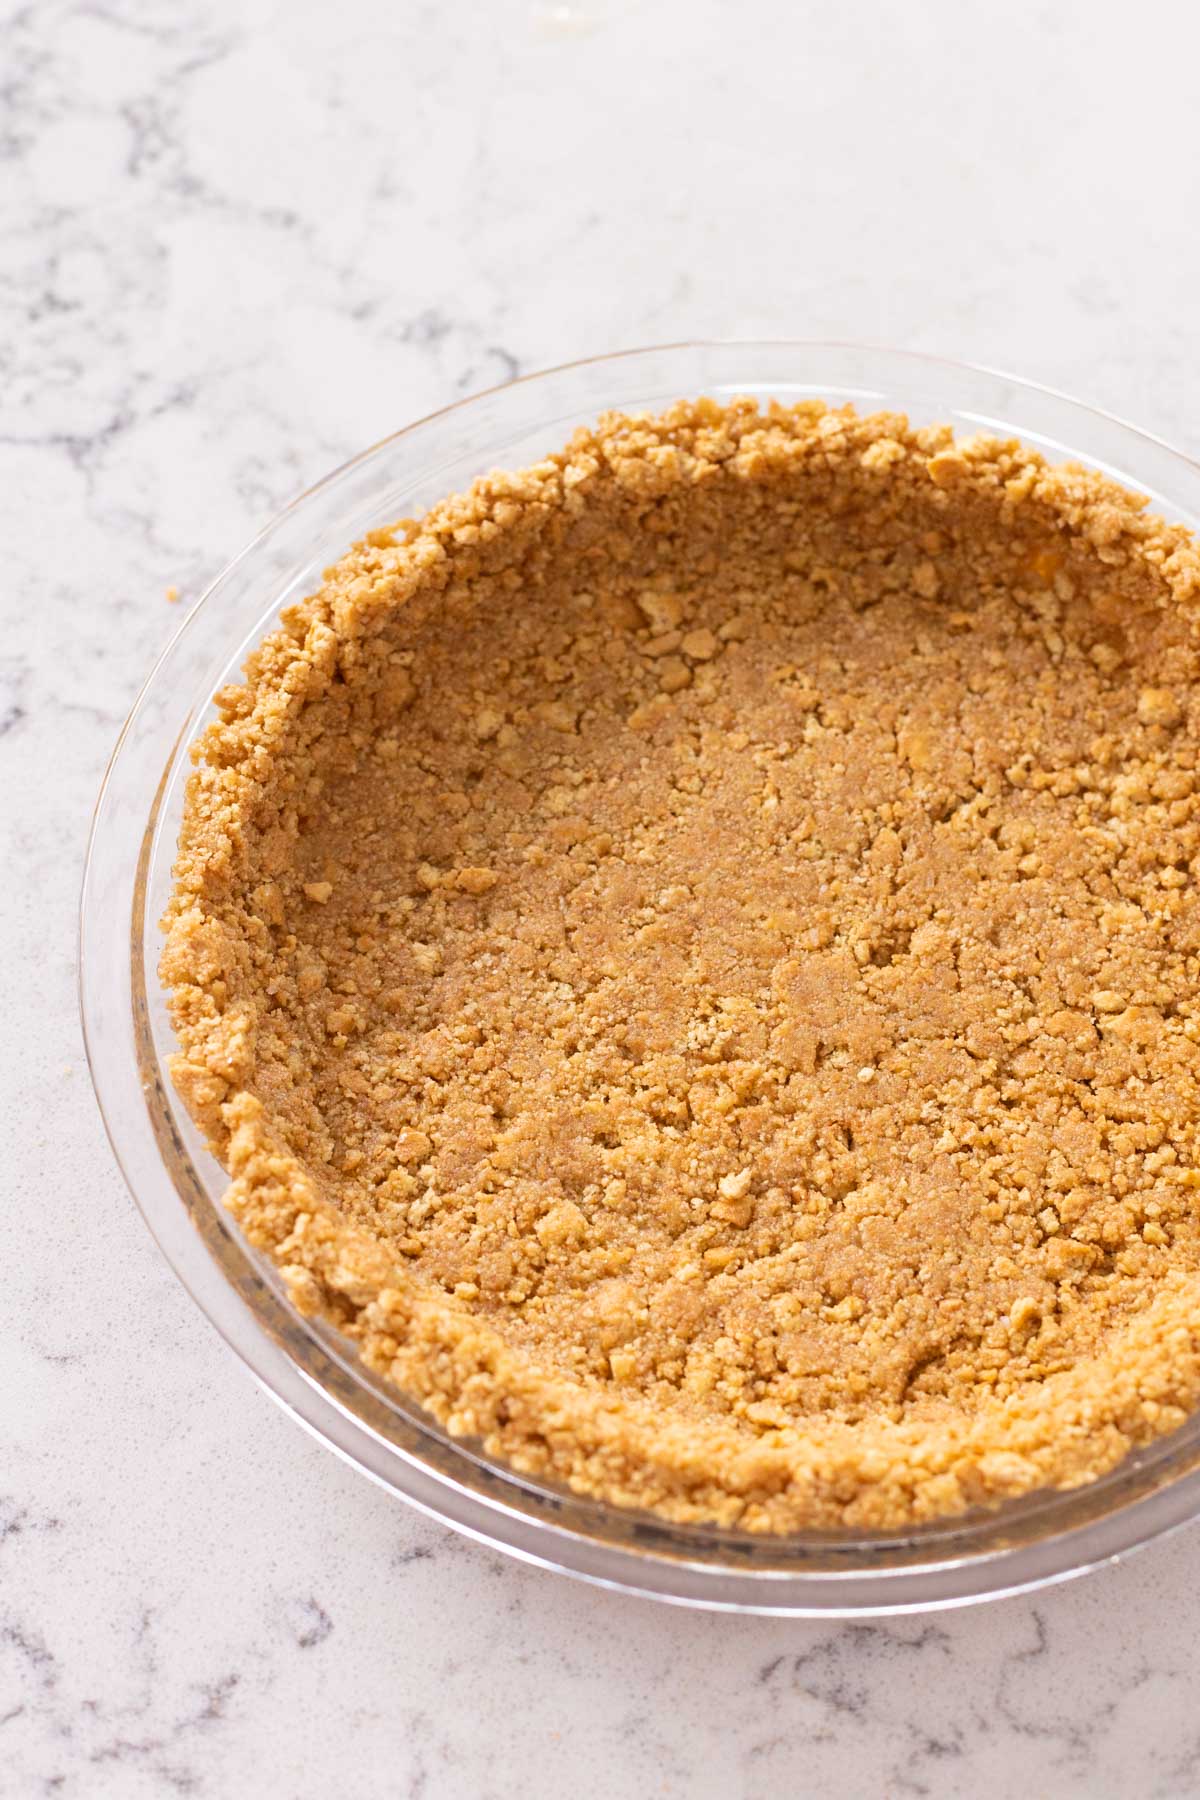 A pie plate has a golden brown graham cracker crust ready to be topped with pie filling.